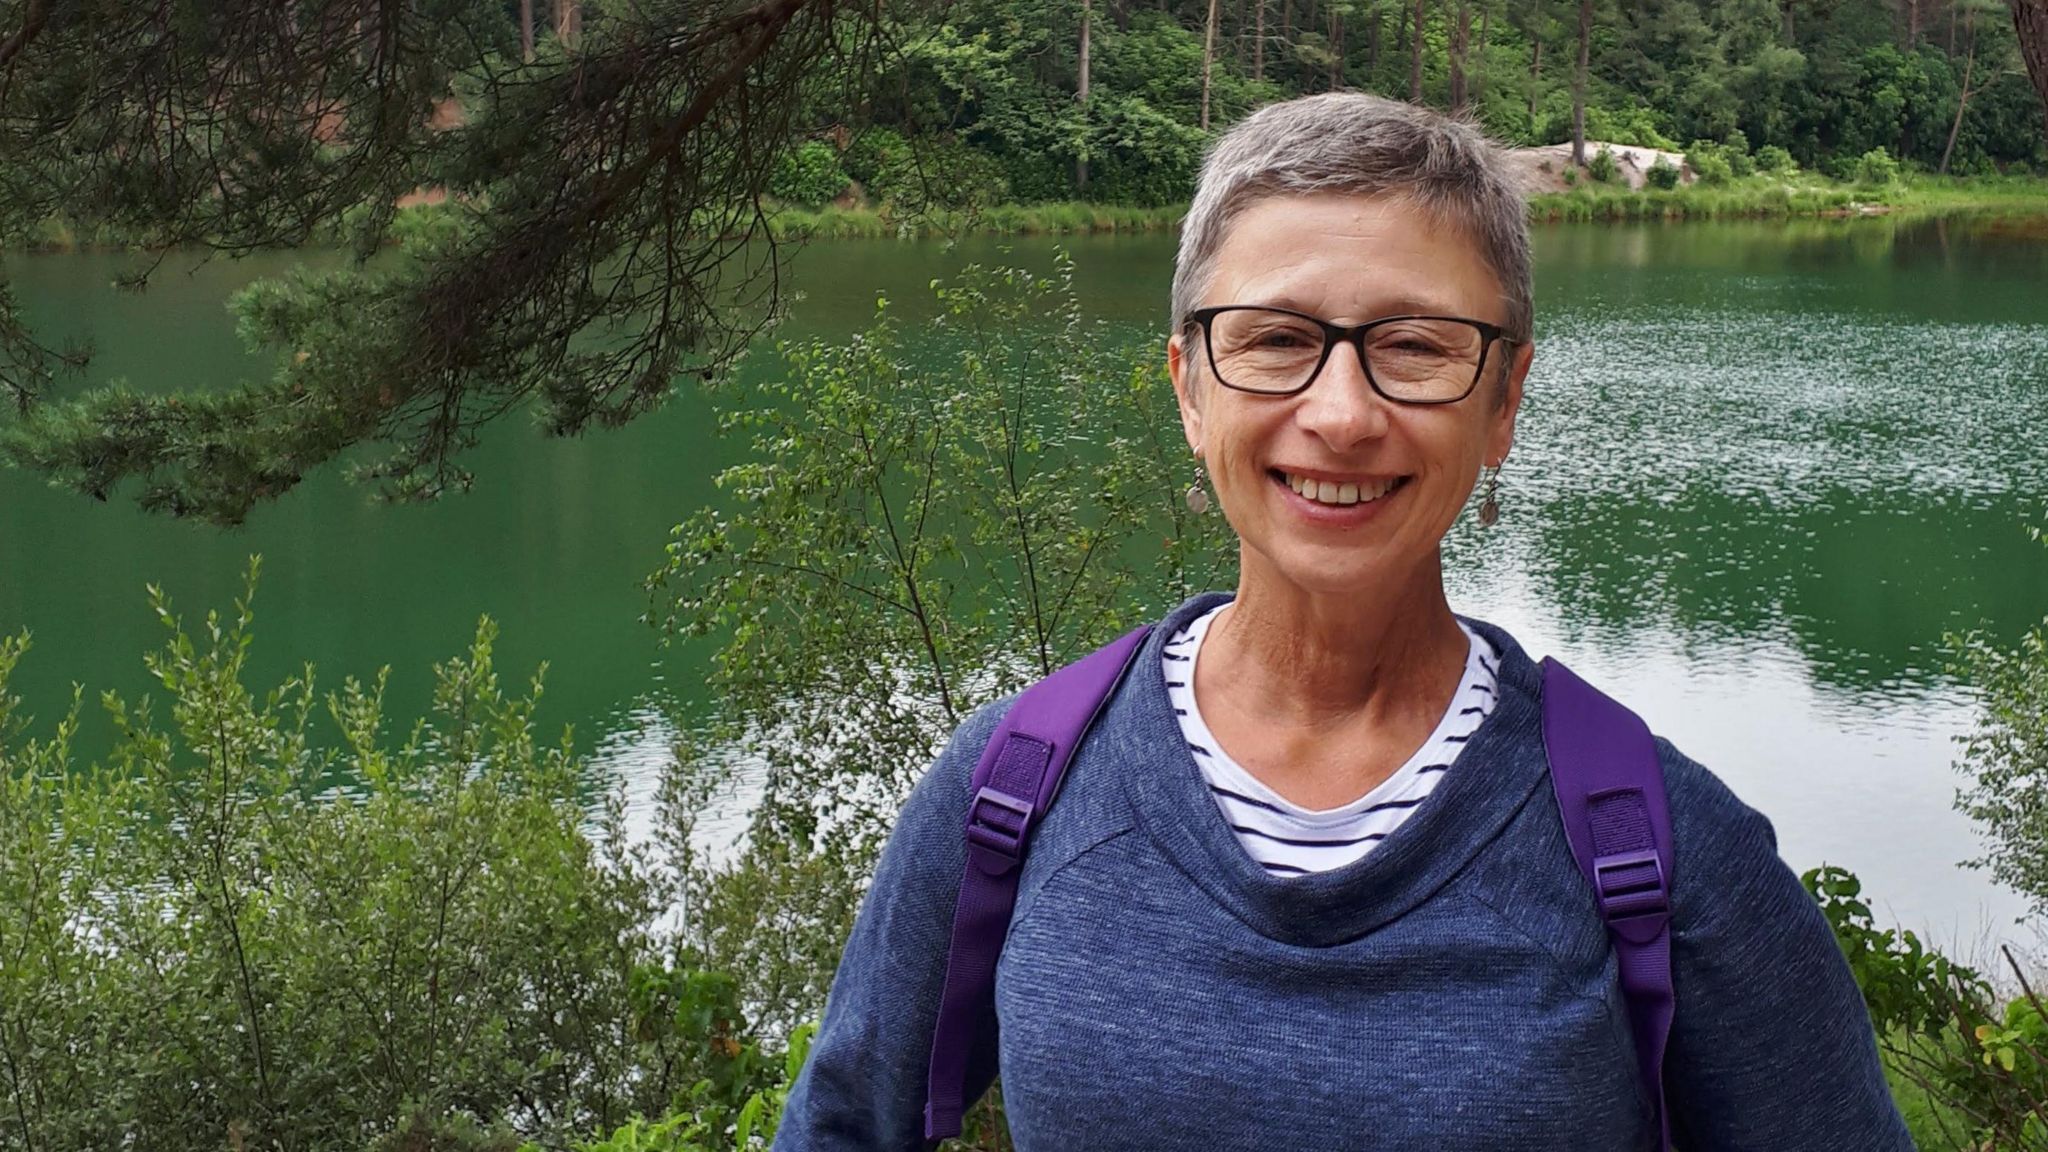 A middle-aged woman with grey hair and glasses, stood in front of a lake.